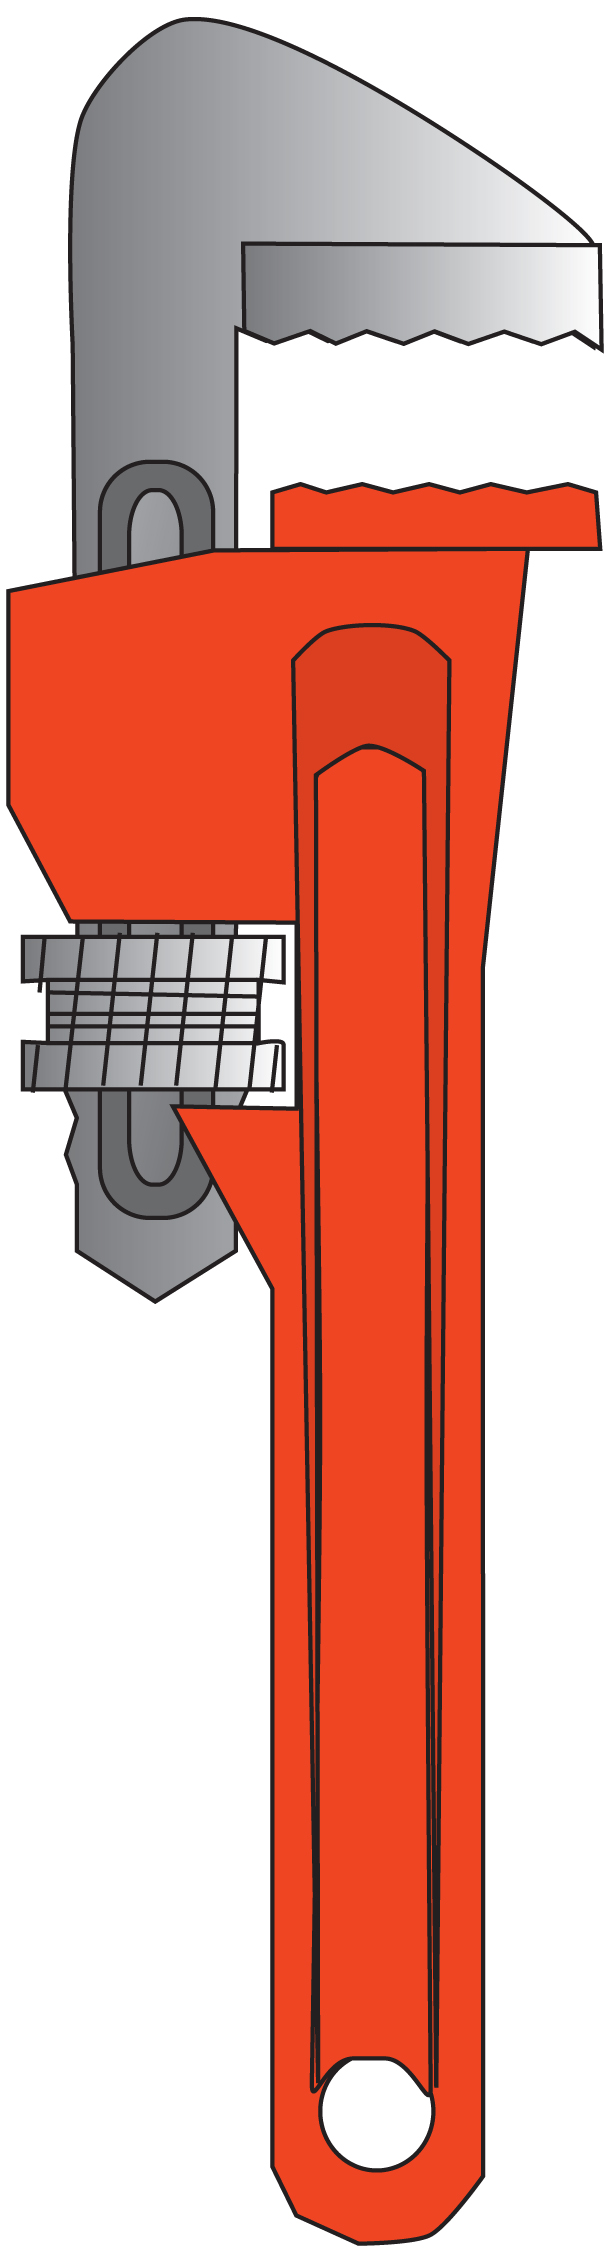 monkey wrench clipart - photo #8